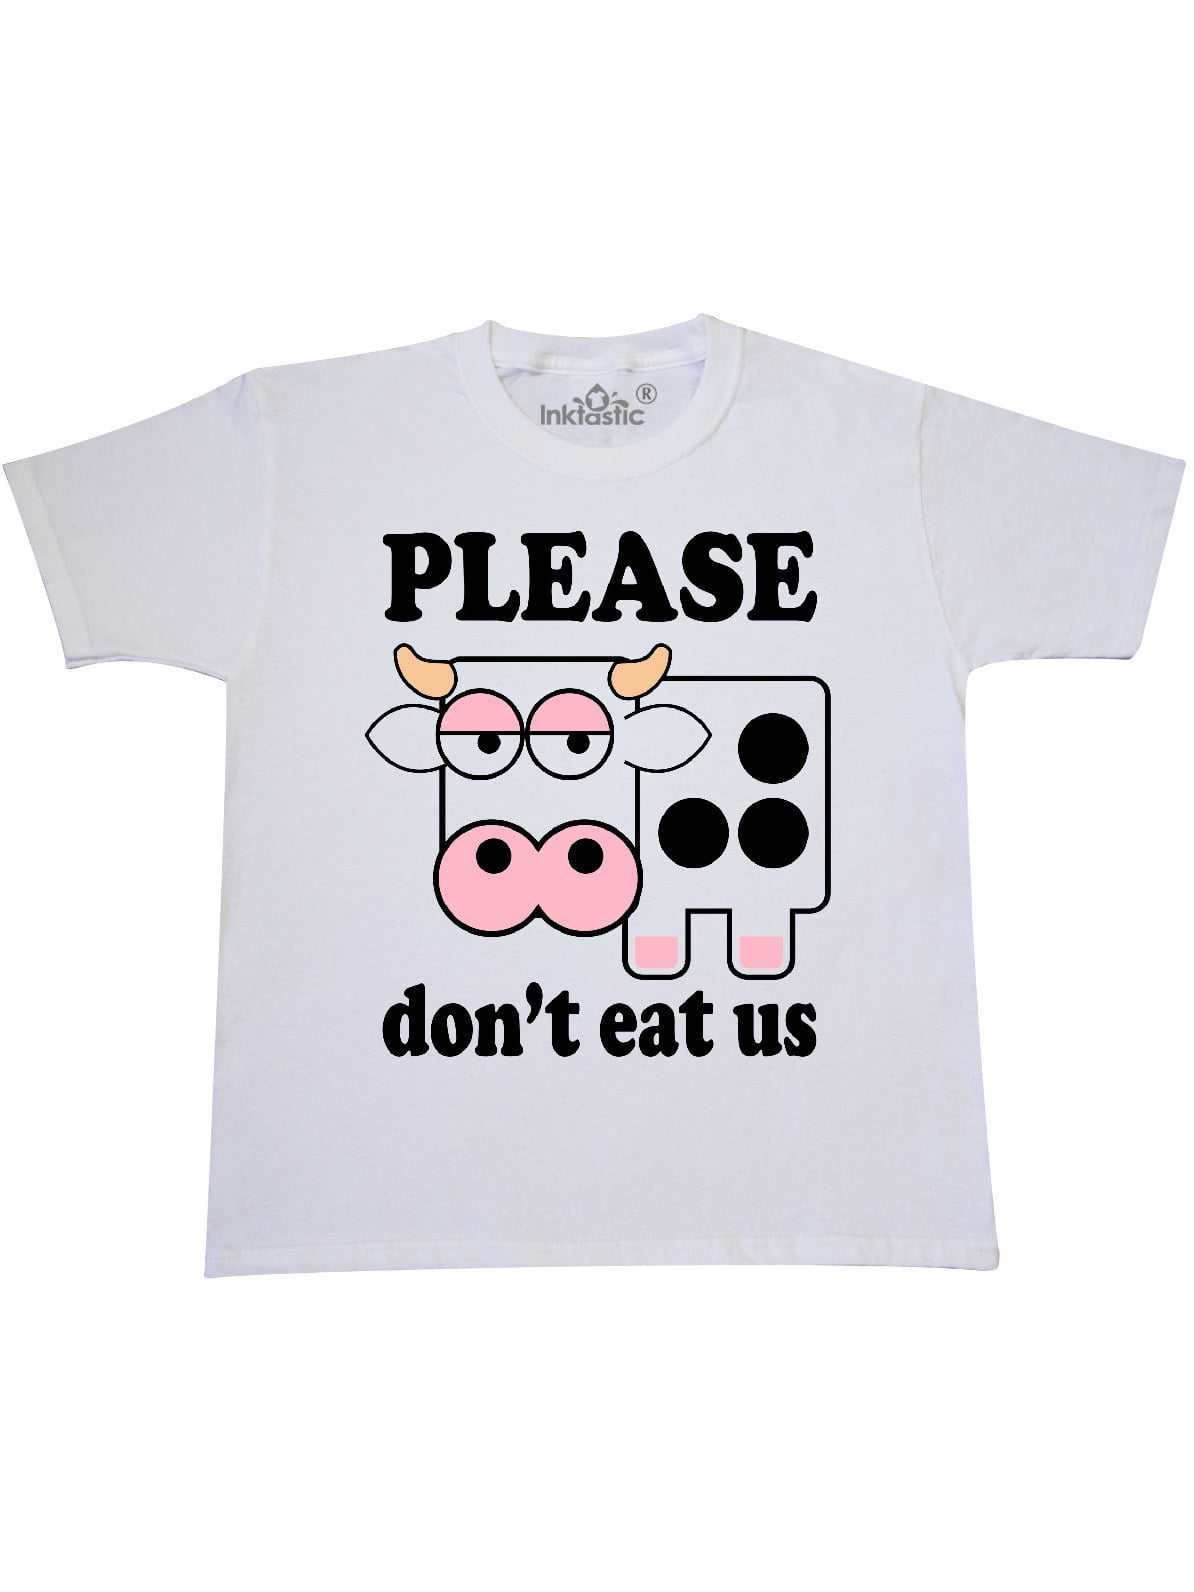 Inktastic Vegan Cow Lover Animal Rights Youth T-Shirt 